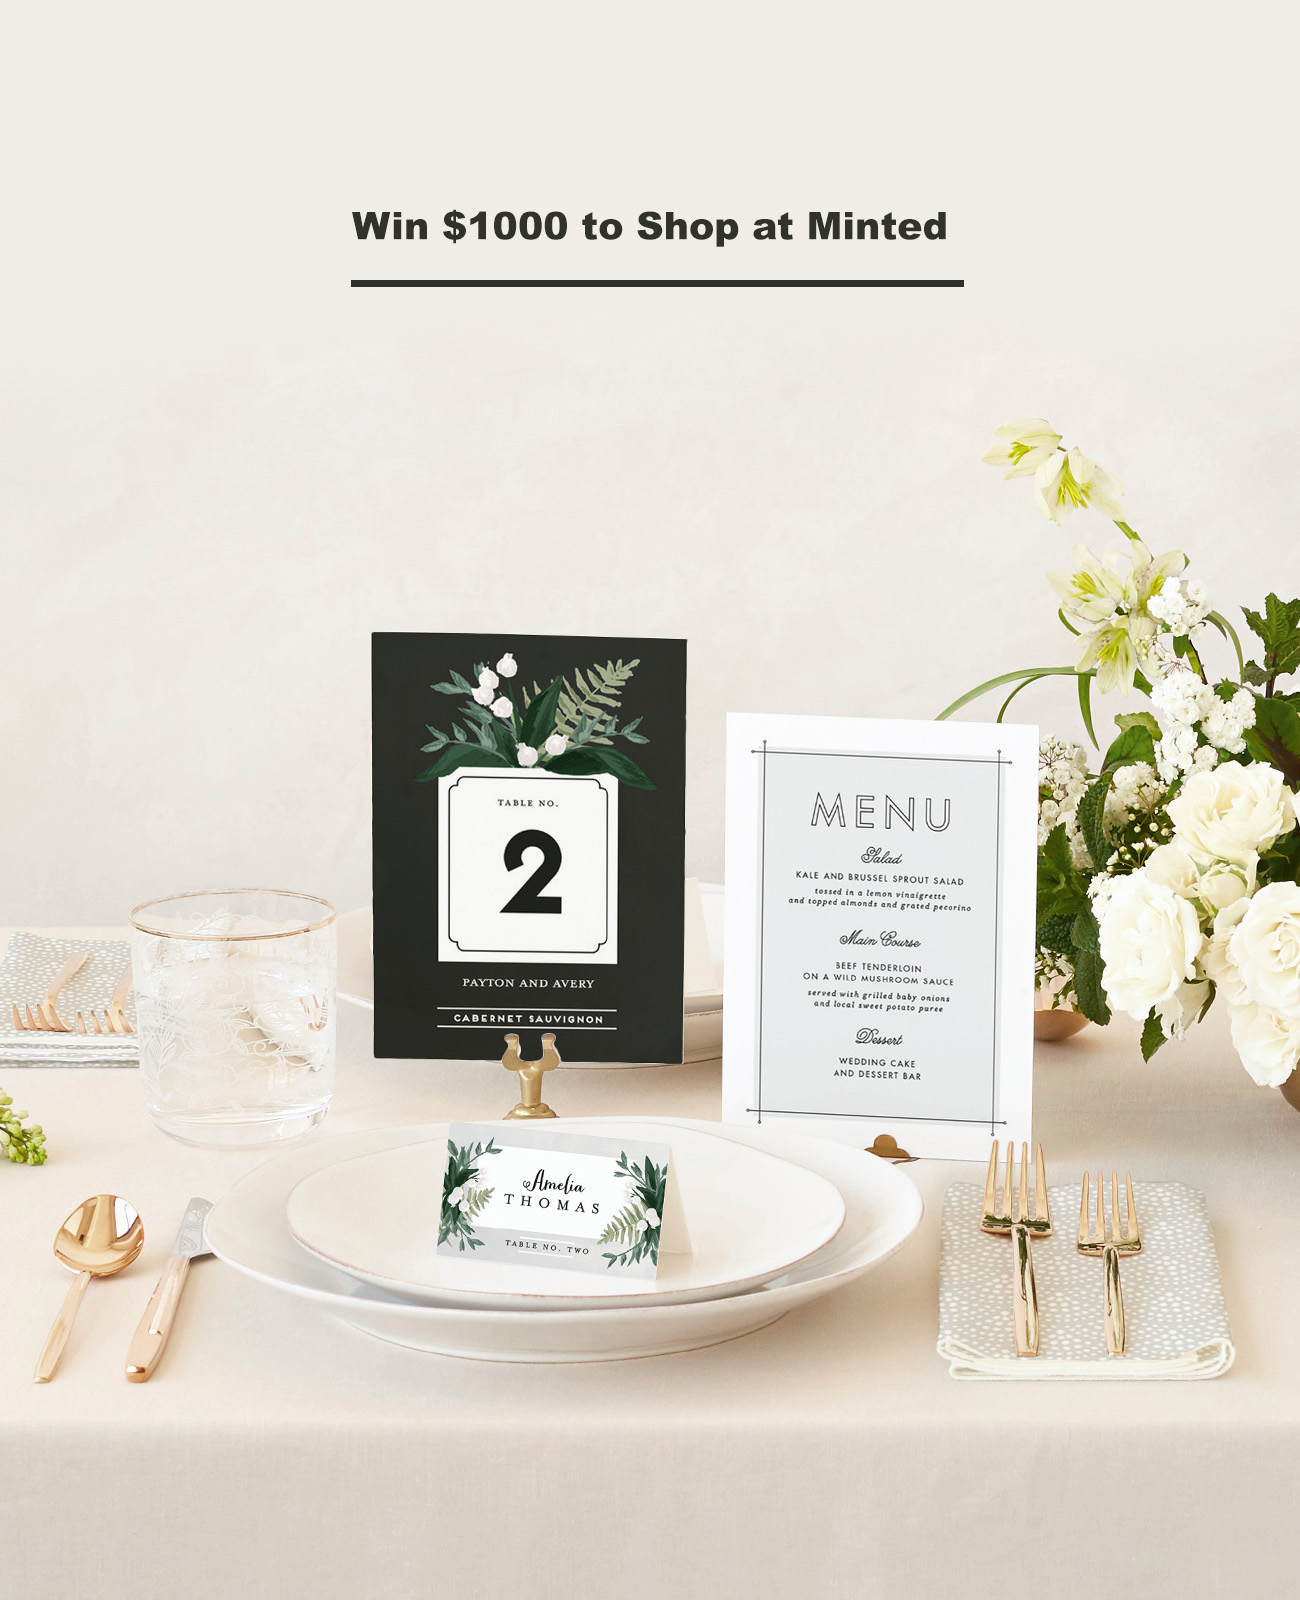 Pretty Place Cards + Save the Dates ? Plus Win $1000 to Shop at Minted!